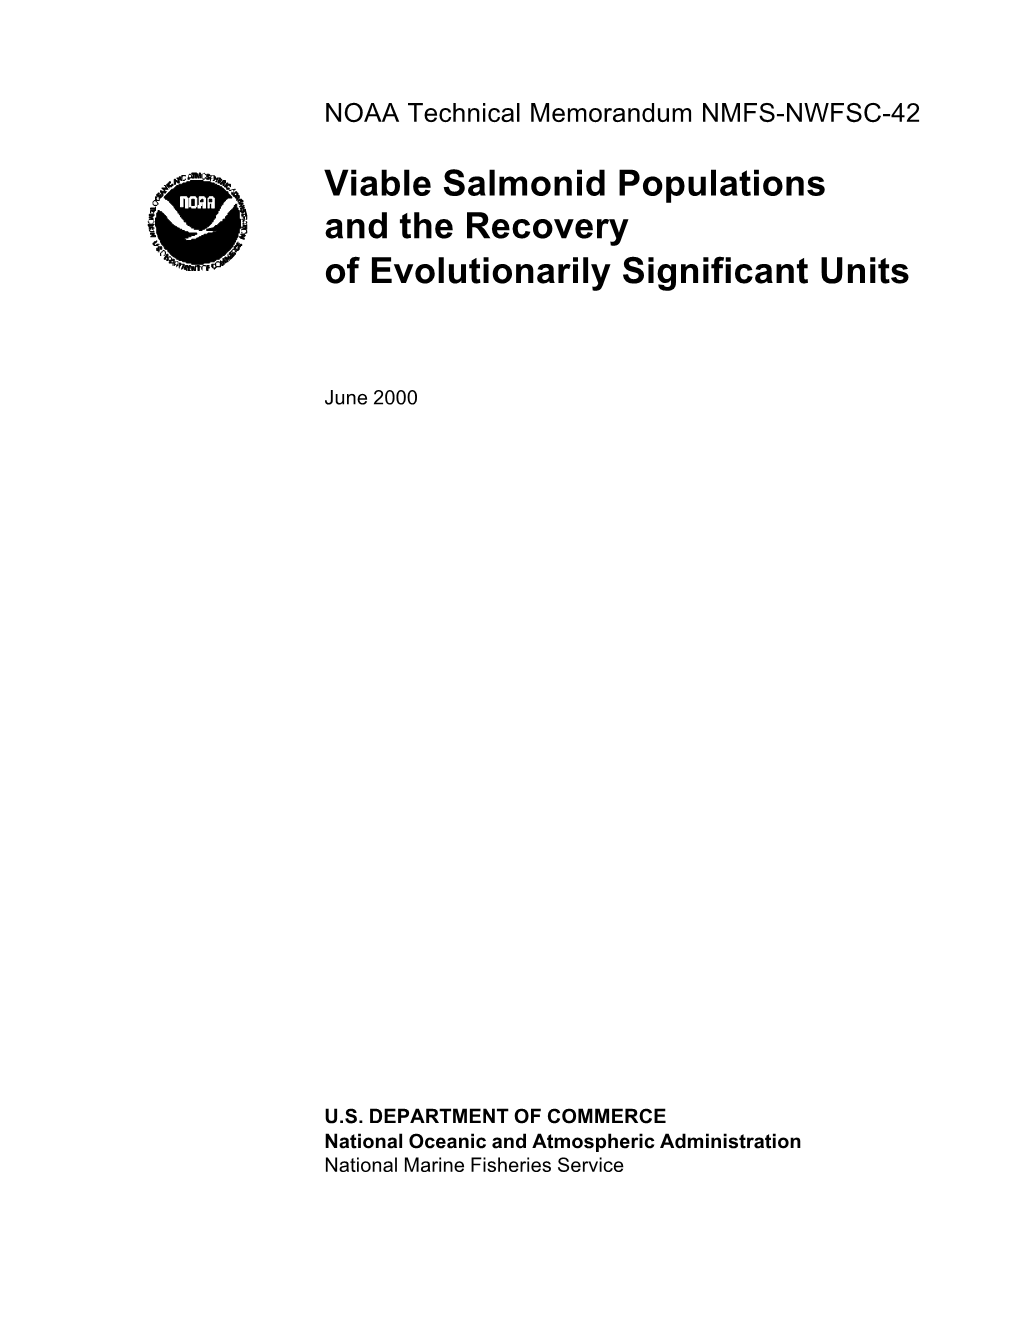 Viable Salmonid Populations and the Recovery of Evolutionarily Significant Units